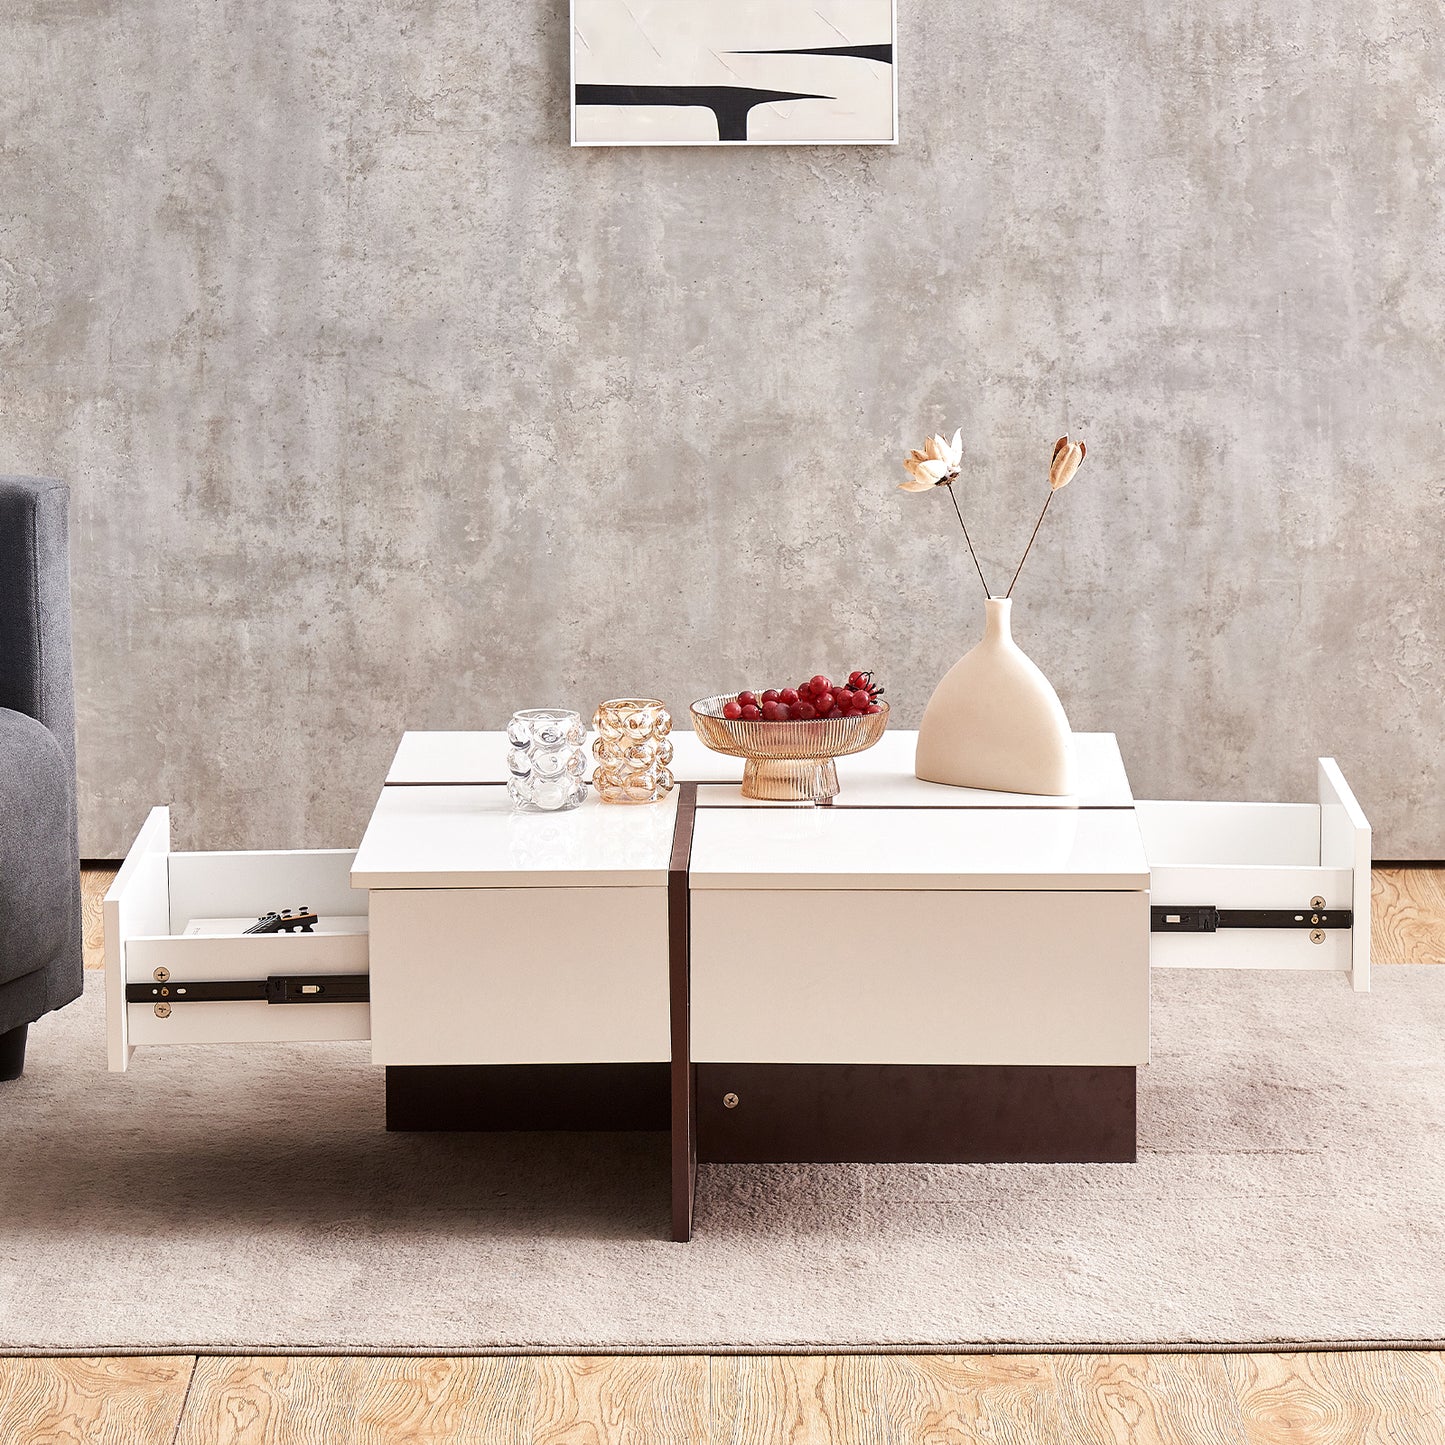 Victoria Collection Modern Style High Gloss & Veneer Finished Living Room Square Coffee Table with 4 Drawers - White & Walnut, Particle Board